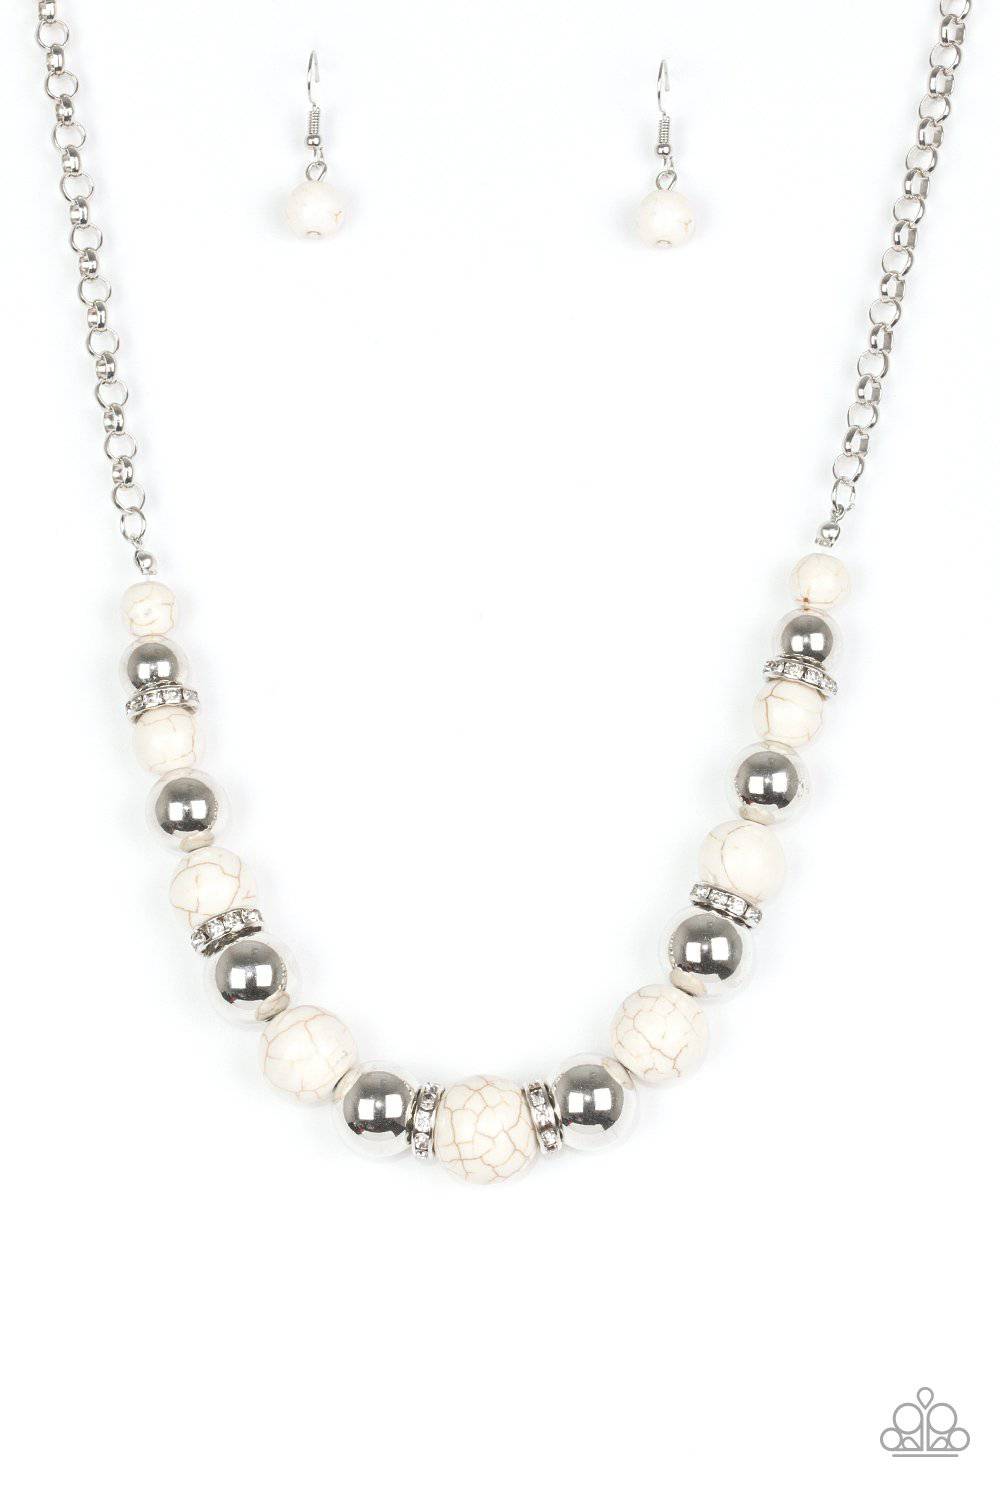 The Ruling Class - White Stone Bead Necklace - Paparazzi Accessories - GlaMarous Titi Jewels